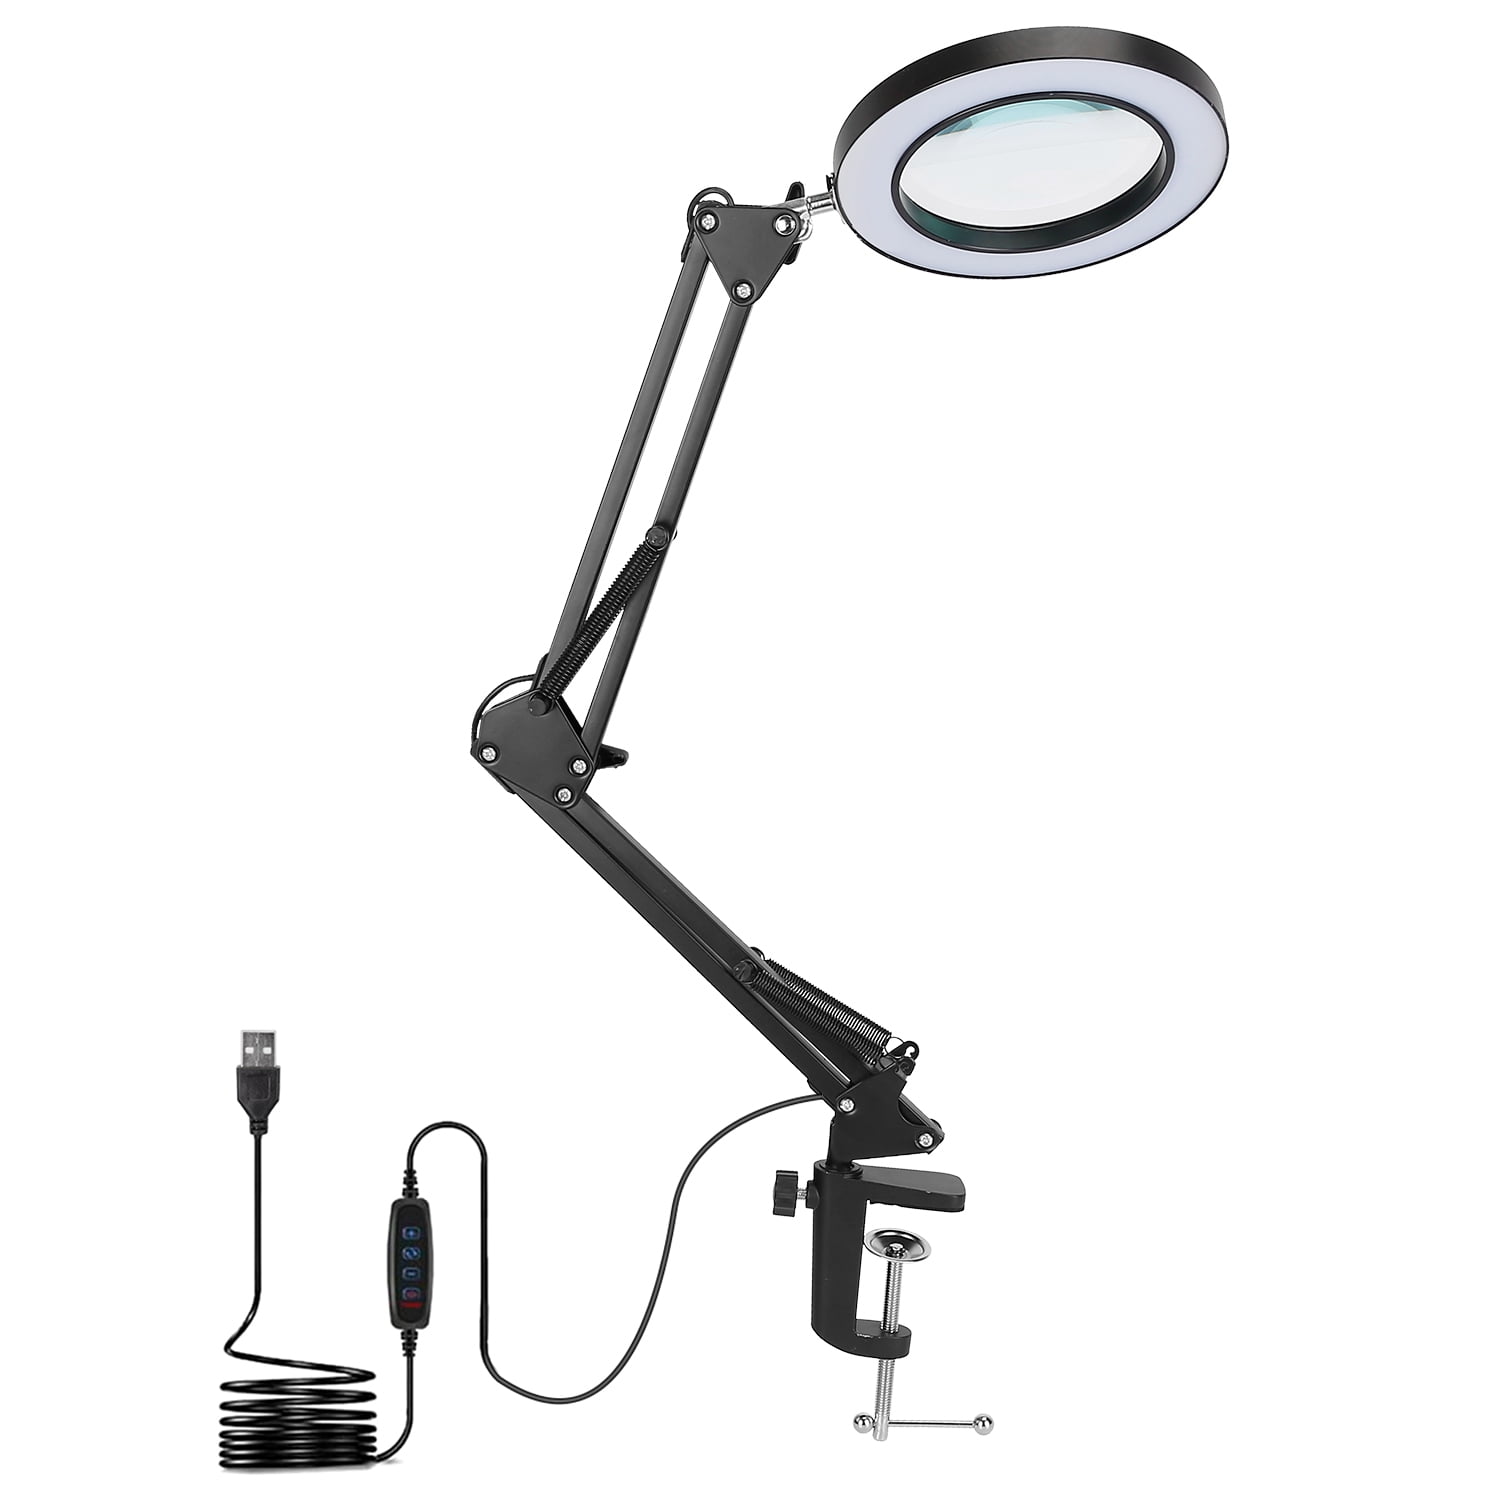 G.peh 10x Magnifying Glass Desk Light Magnifier LED Lamp Reading Lamp with Base& Clamp, Size: 2 in, Black